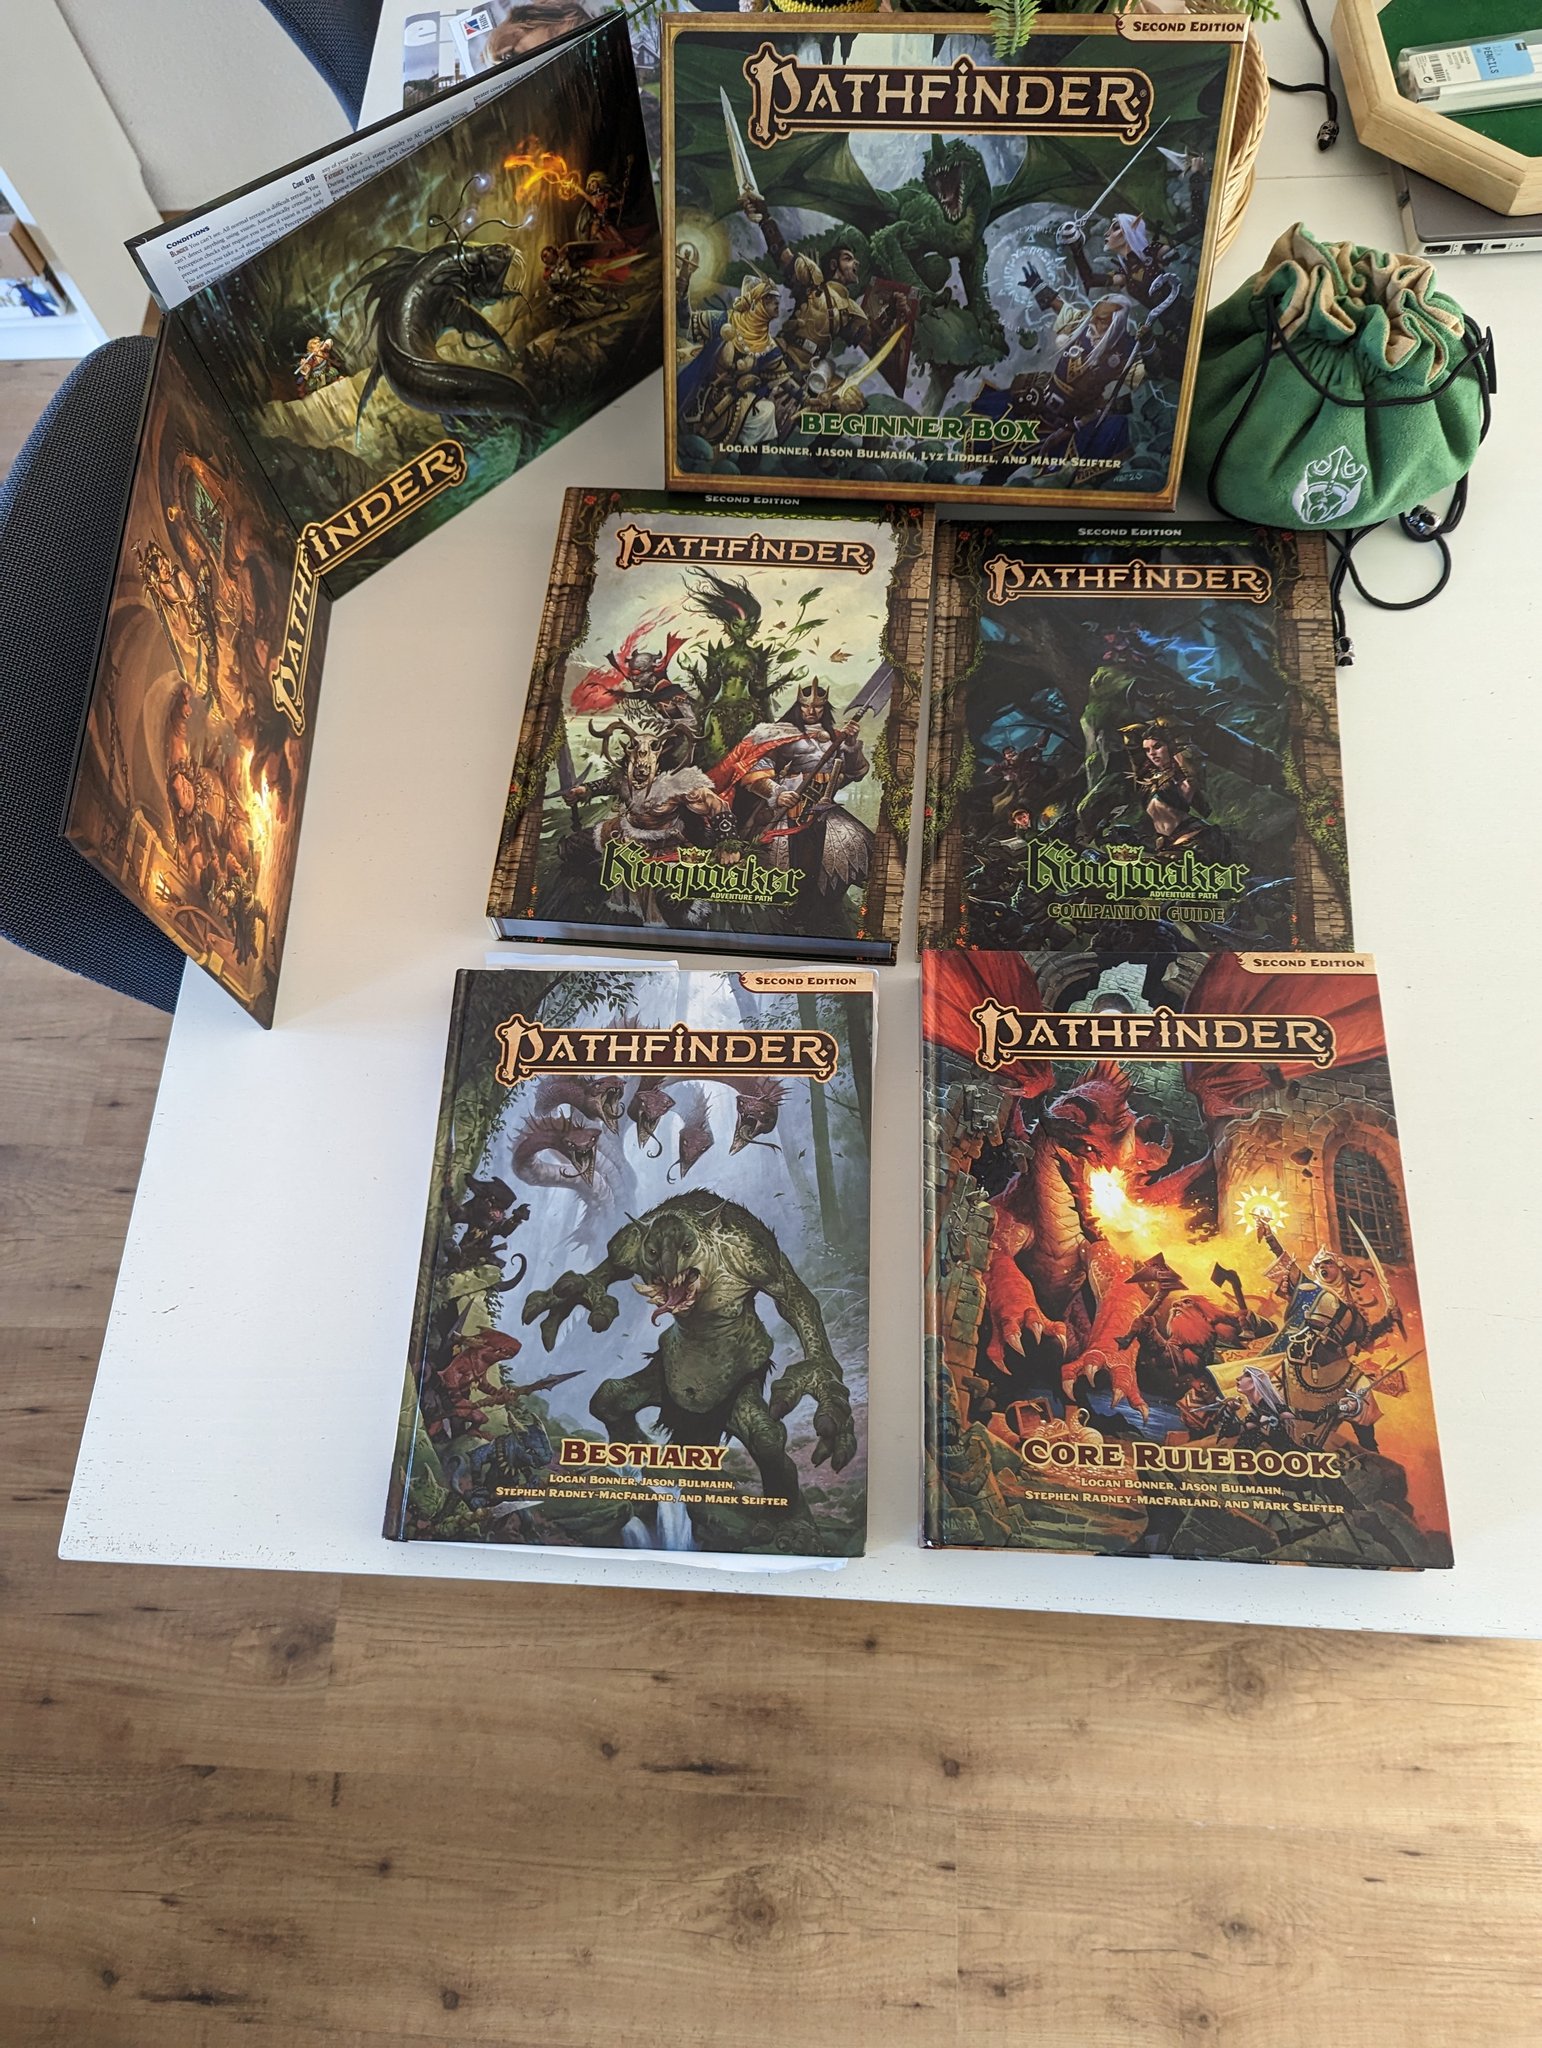 Humble Bundle on X: We're extending our @paizo Pathfinder bundle! Pay what  you want for this awesome set of rulebooks, Adventure Paths & one-offs,  character guides, and more digital resources while supporting @